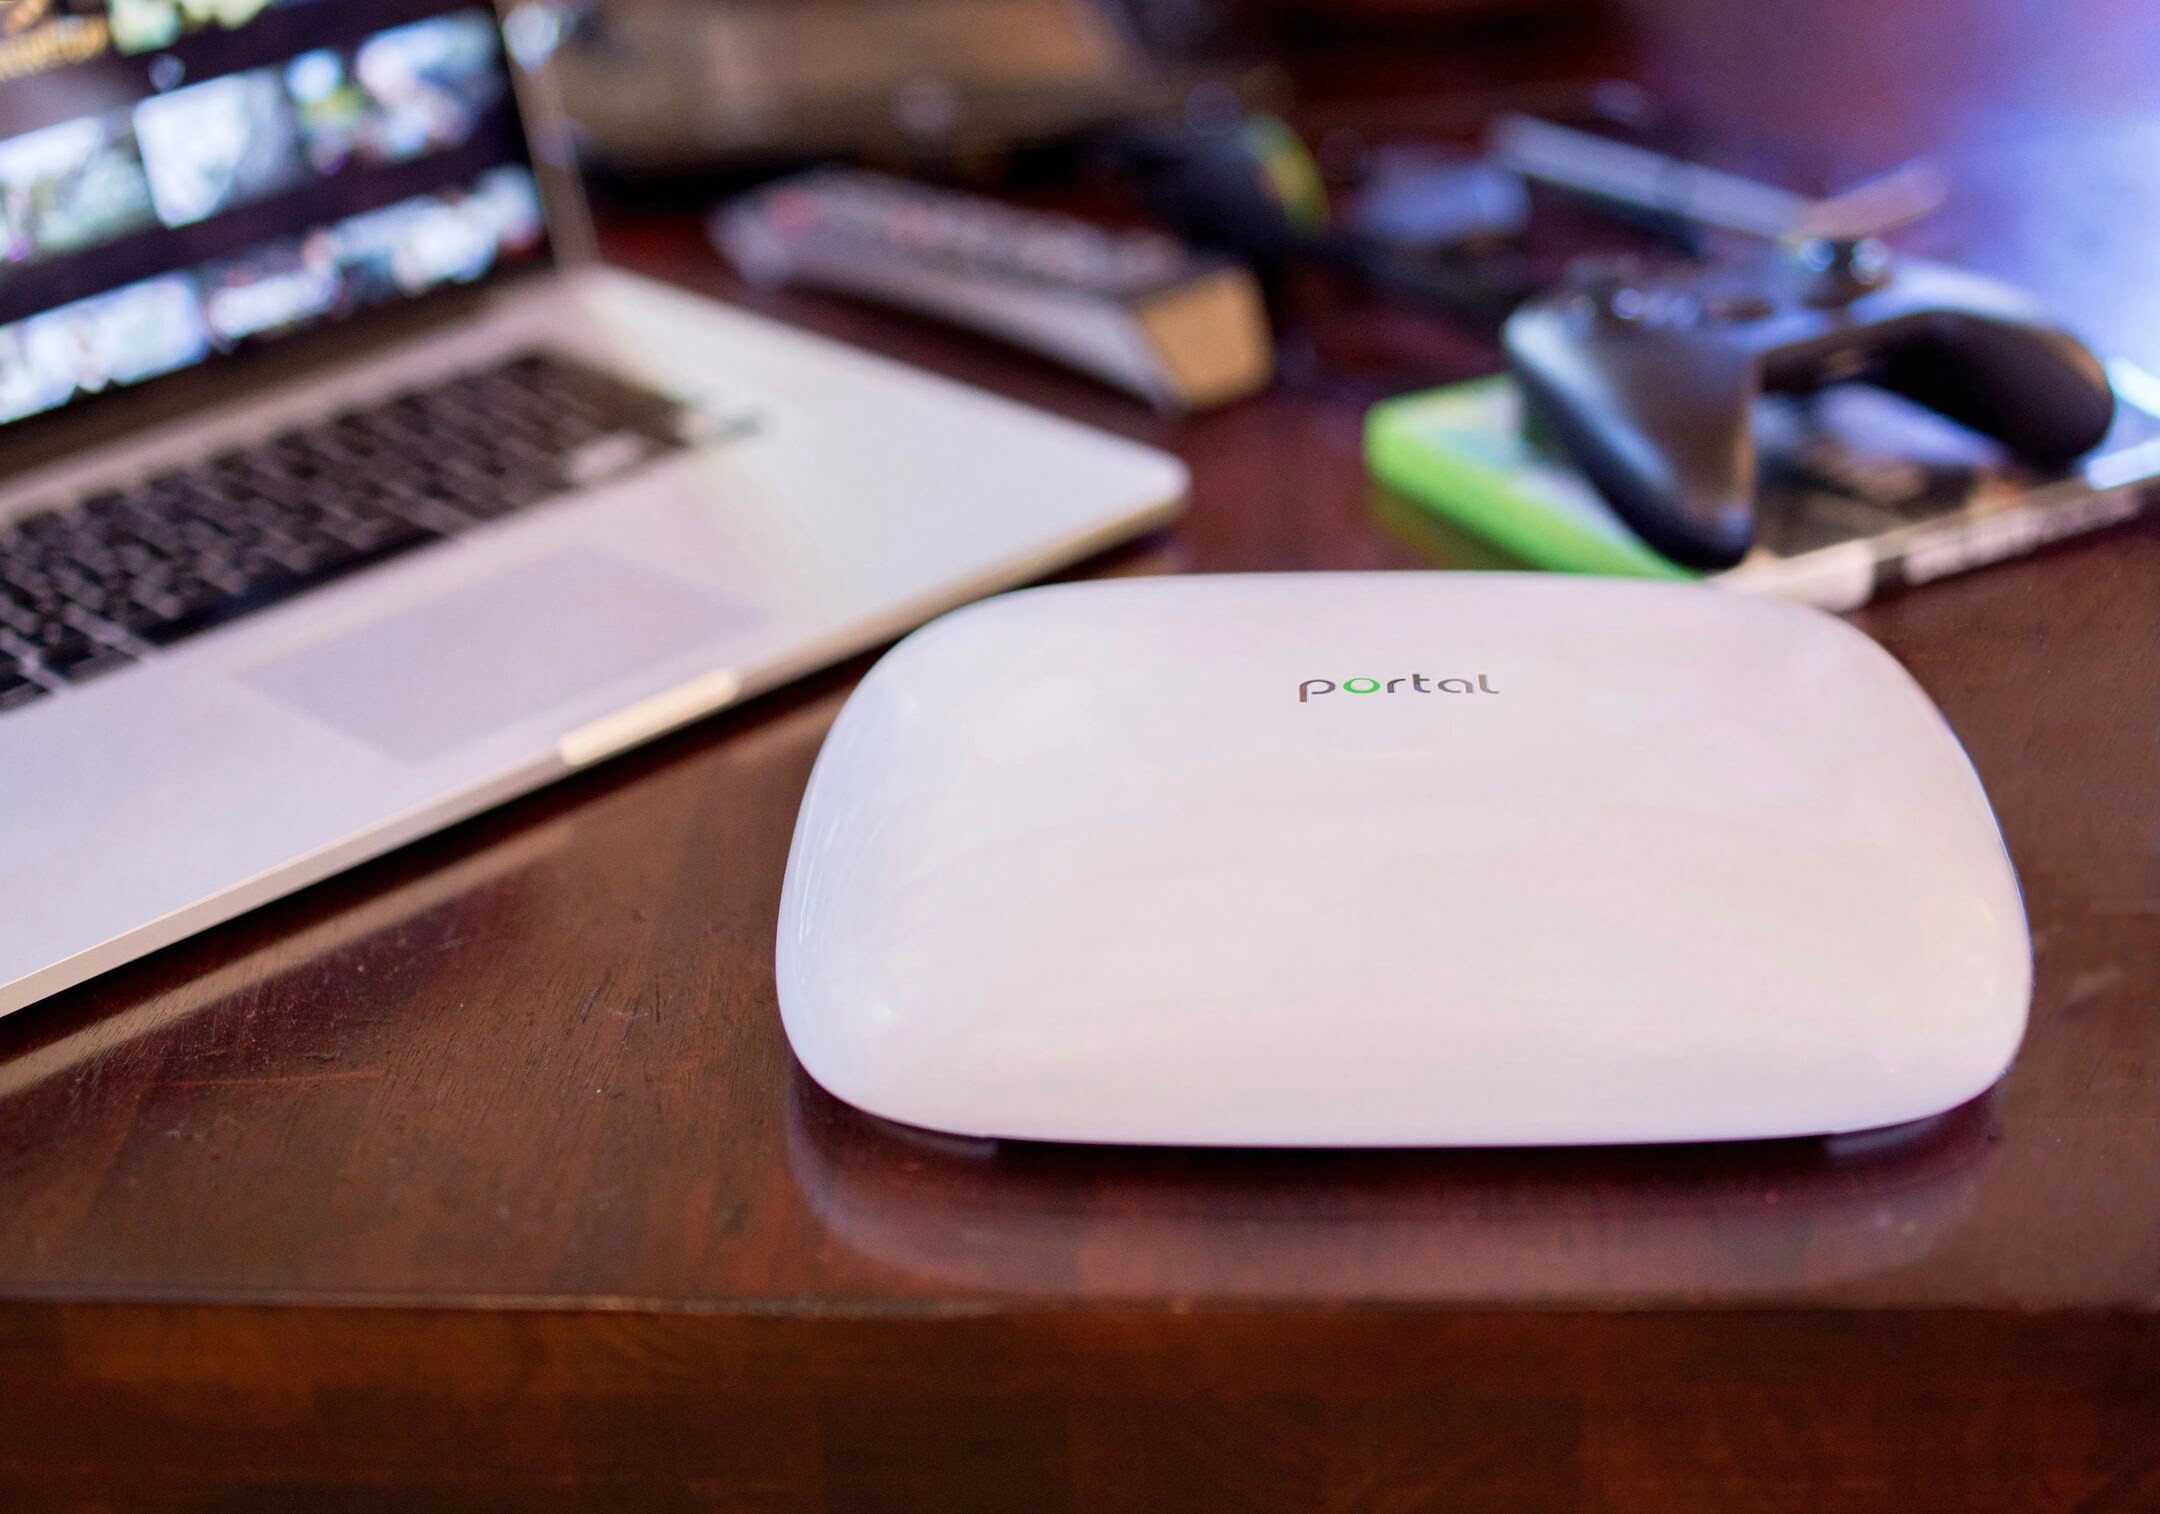 How To Configure A Wi-Fi Router